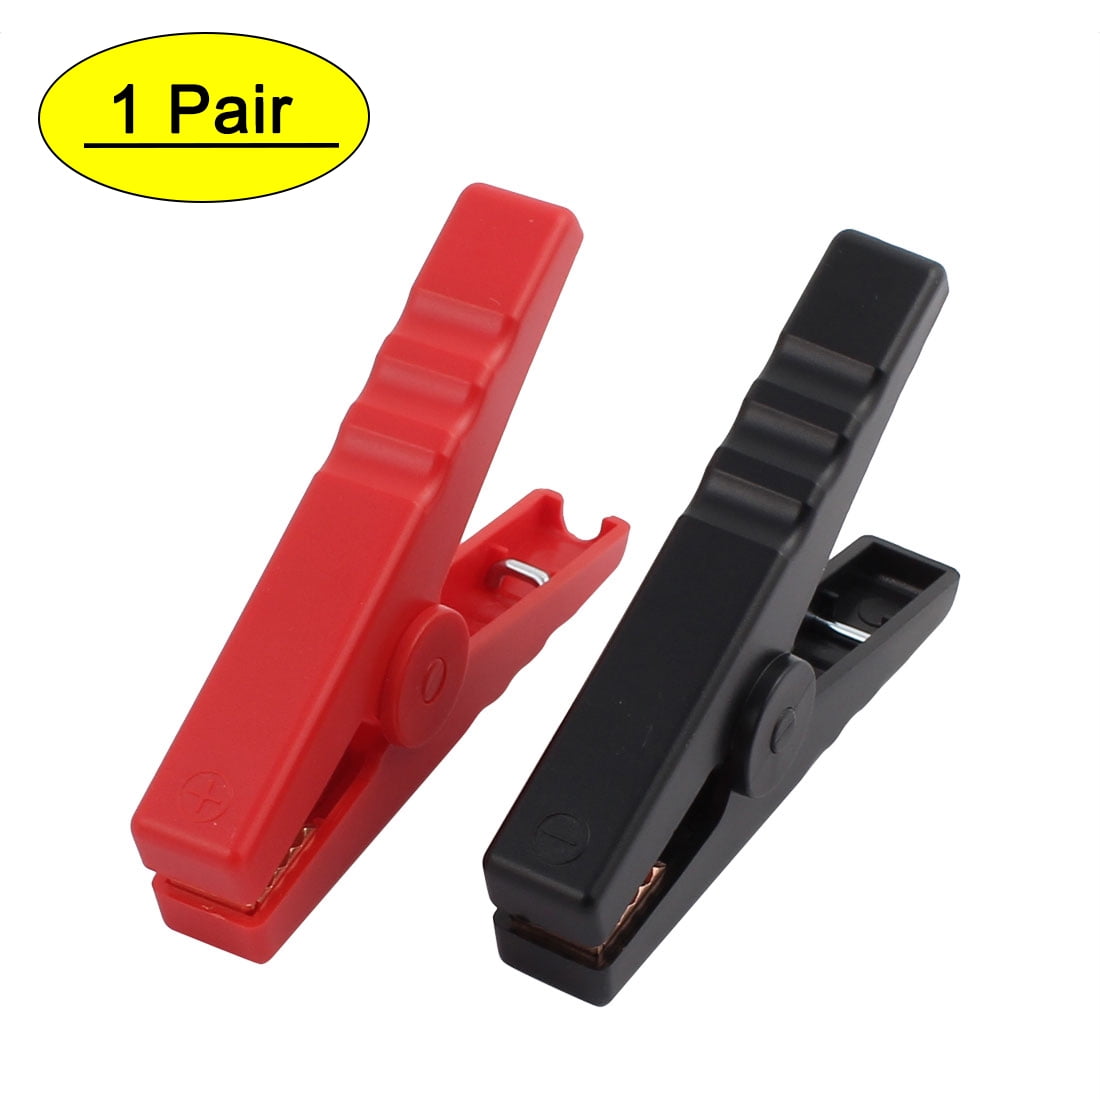 Replacement Battery Booster Jump Cable Lead Alligator Clamps One Red One Black 